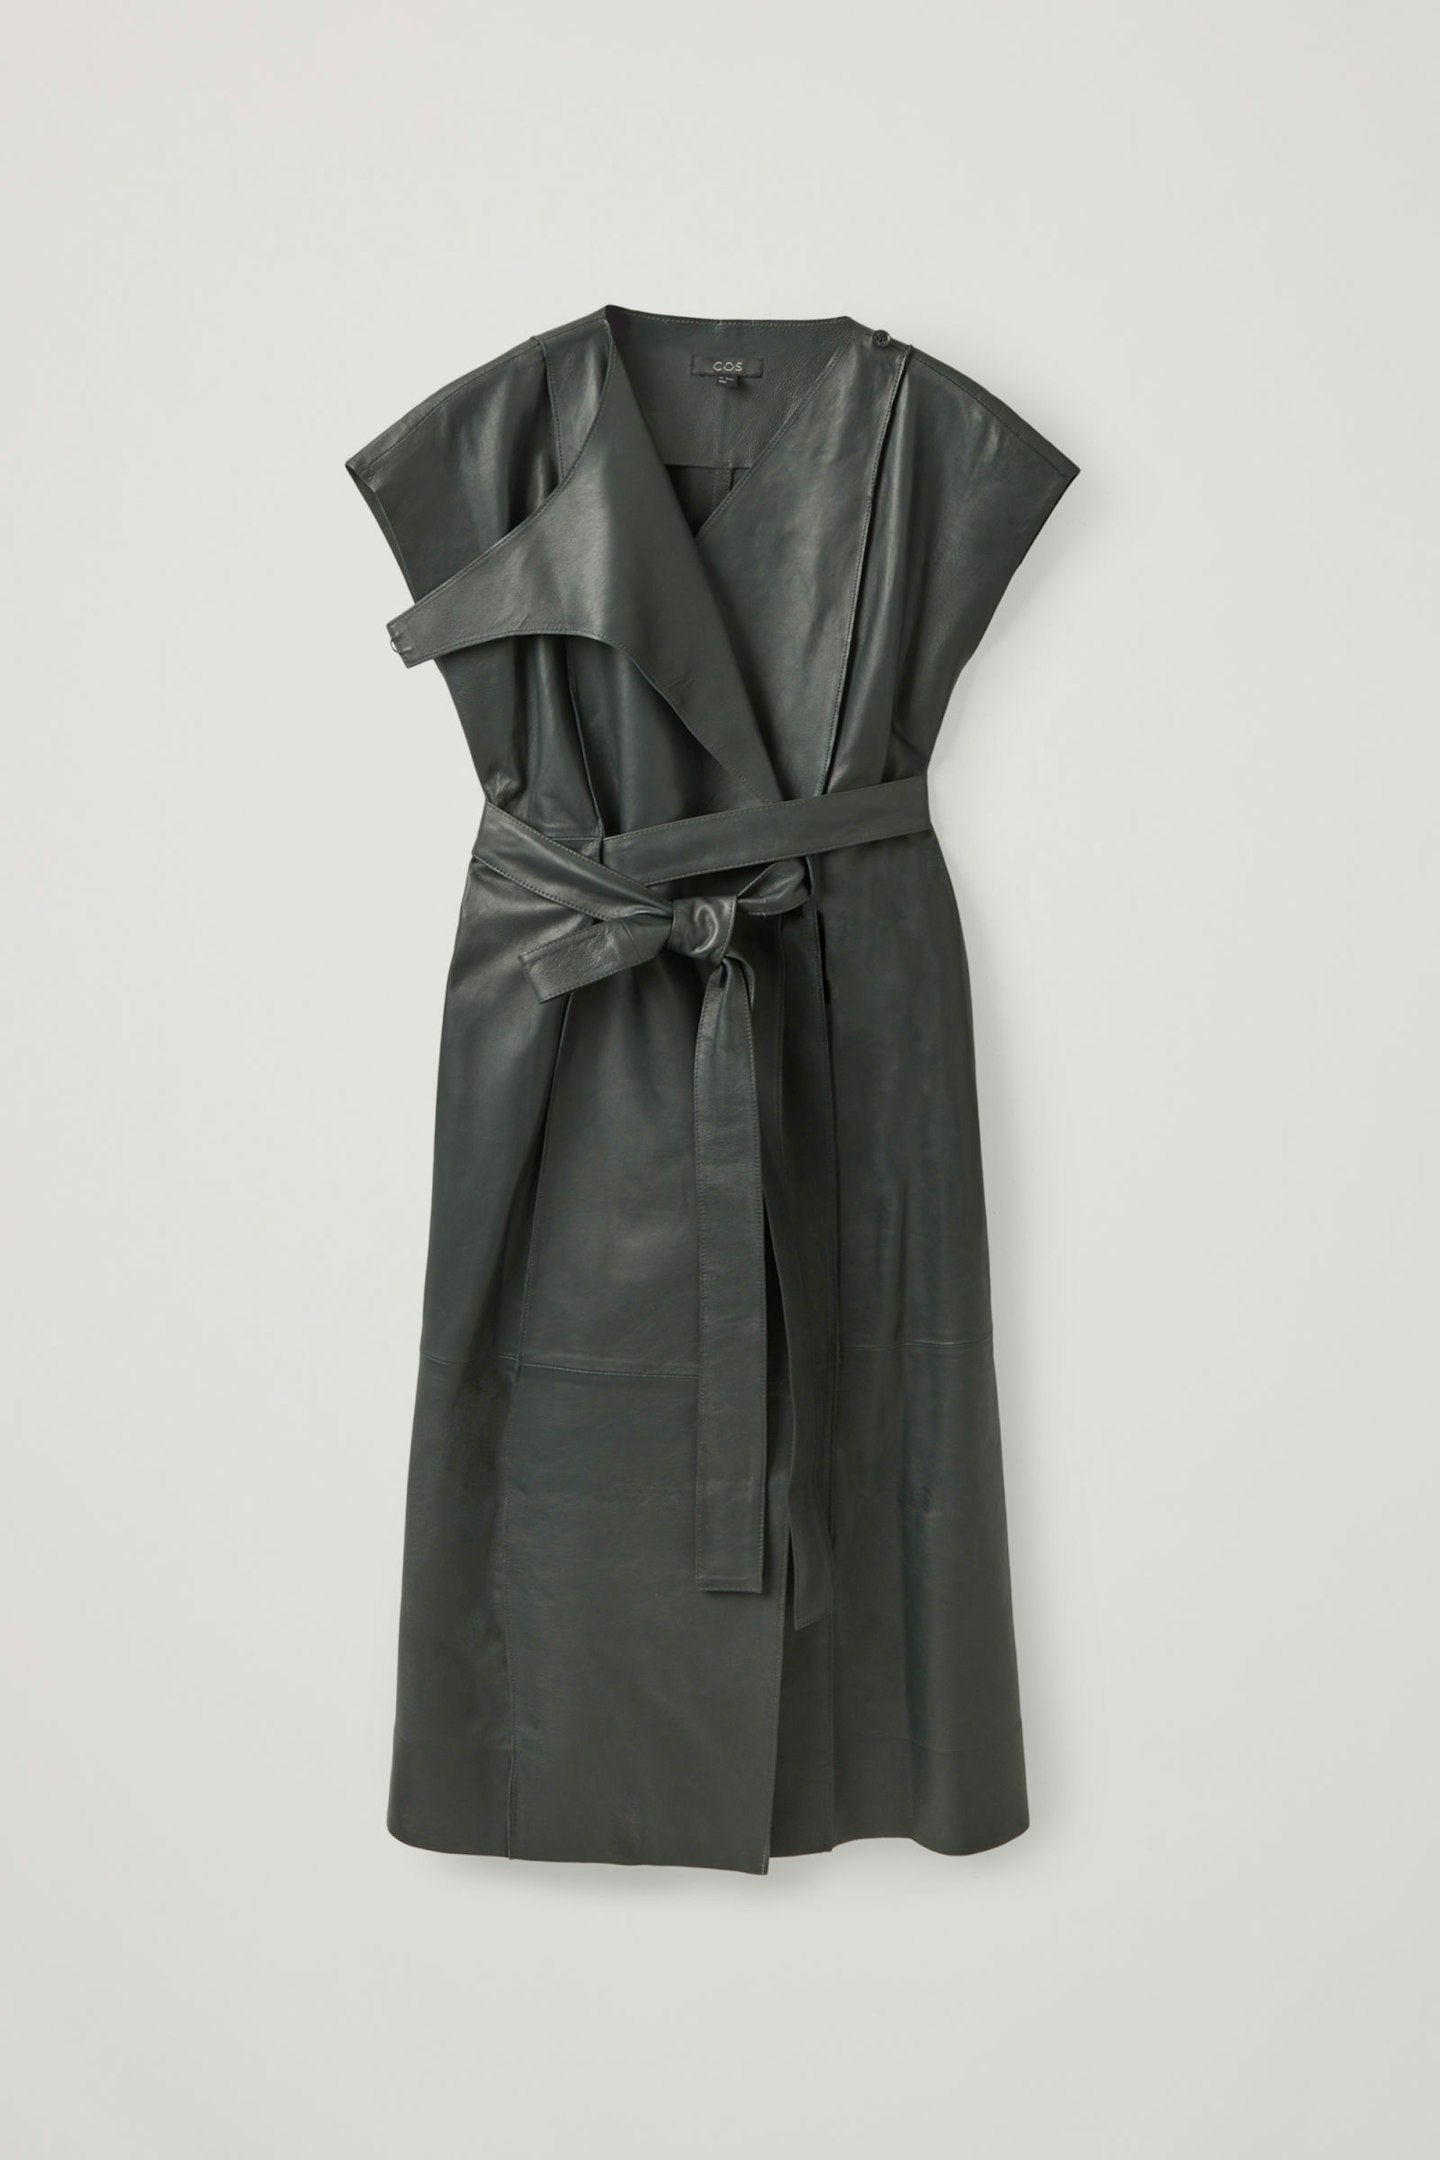 COS, Belted Leather Dress, £390